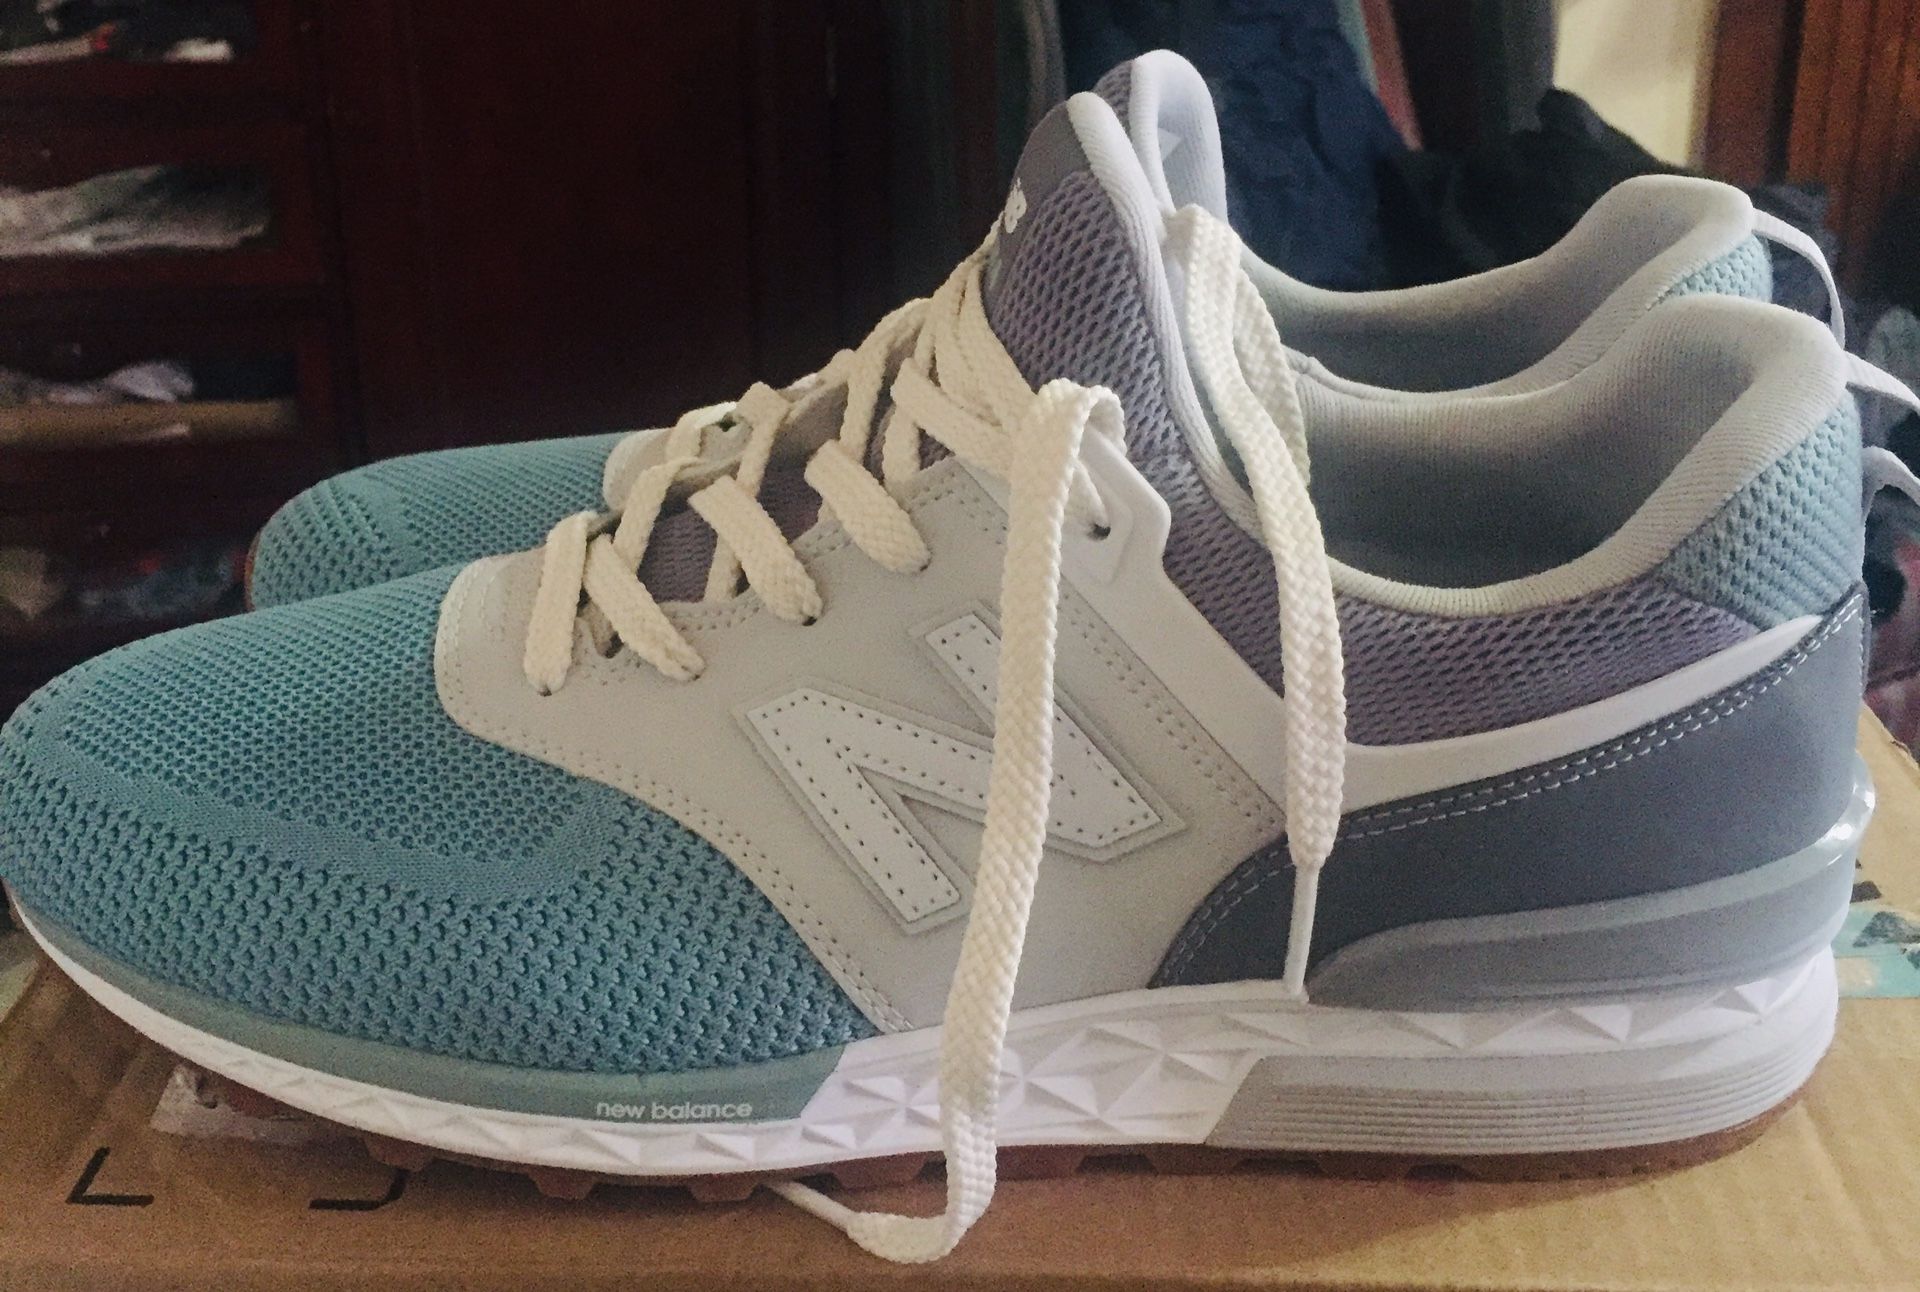 ***BRAND NEW*** New Balance Grey with Blue Size 11.5